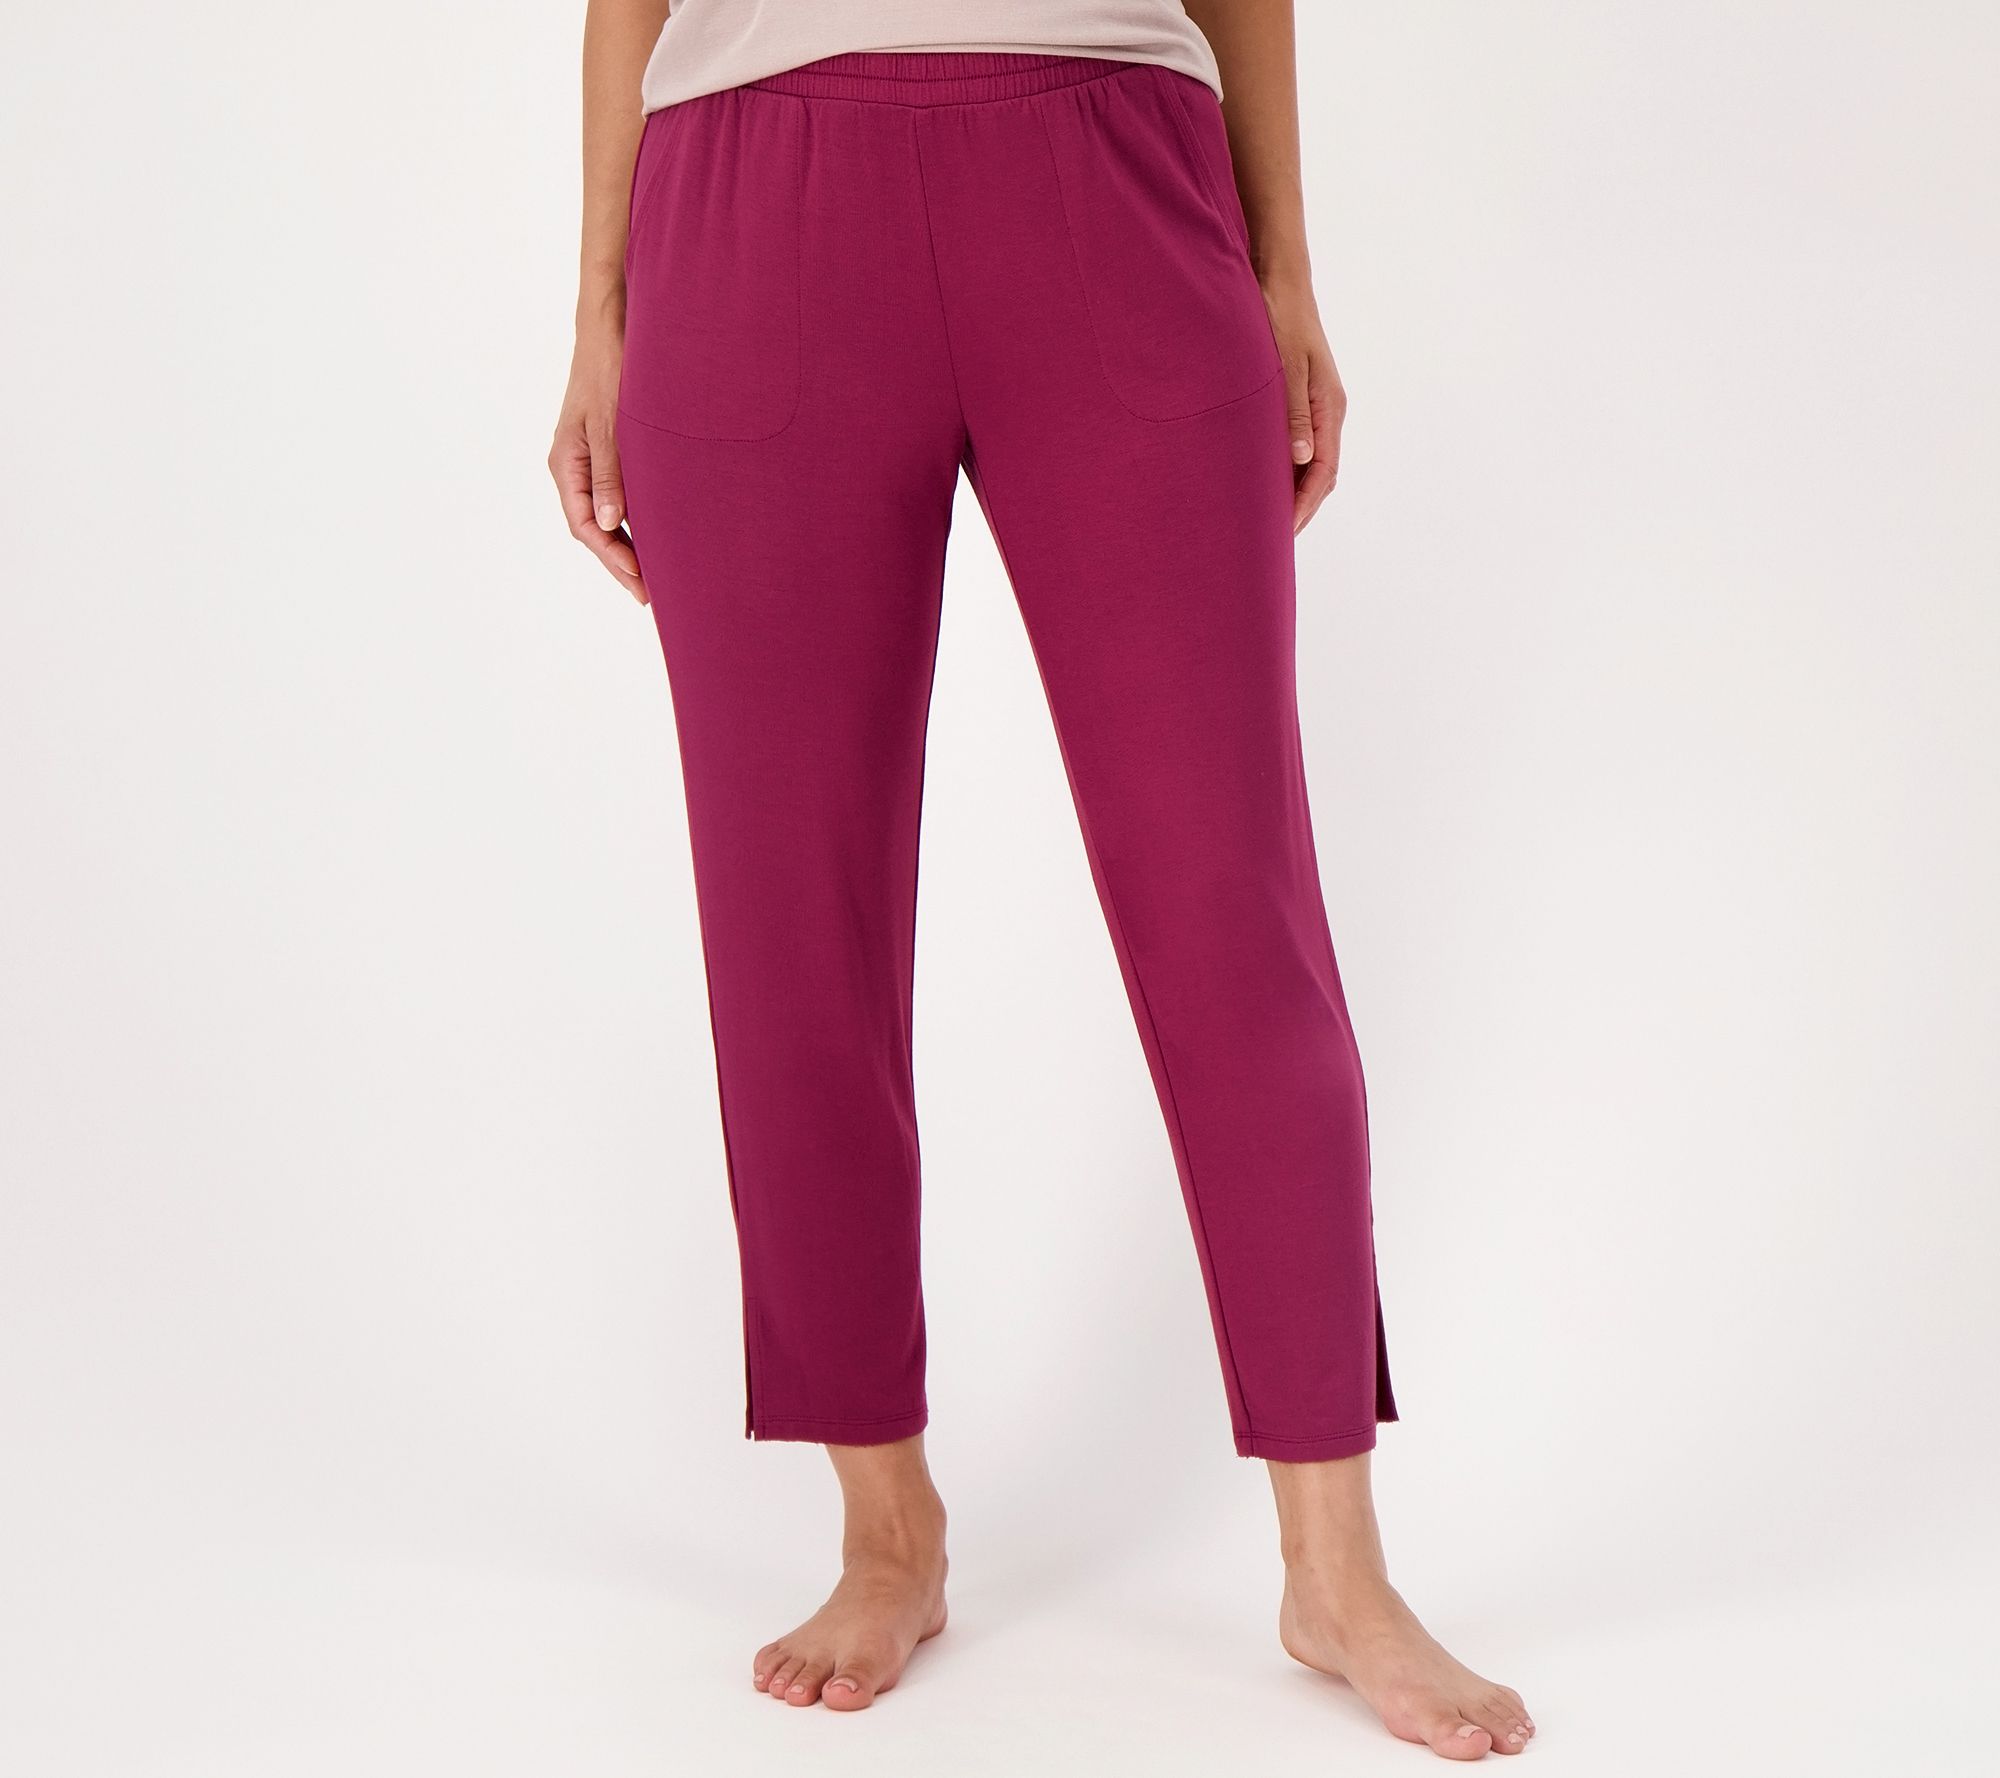 AnyBody Cozy Knit French Terry Pull On Pants - QVC.com